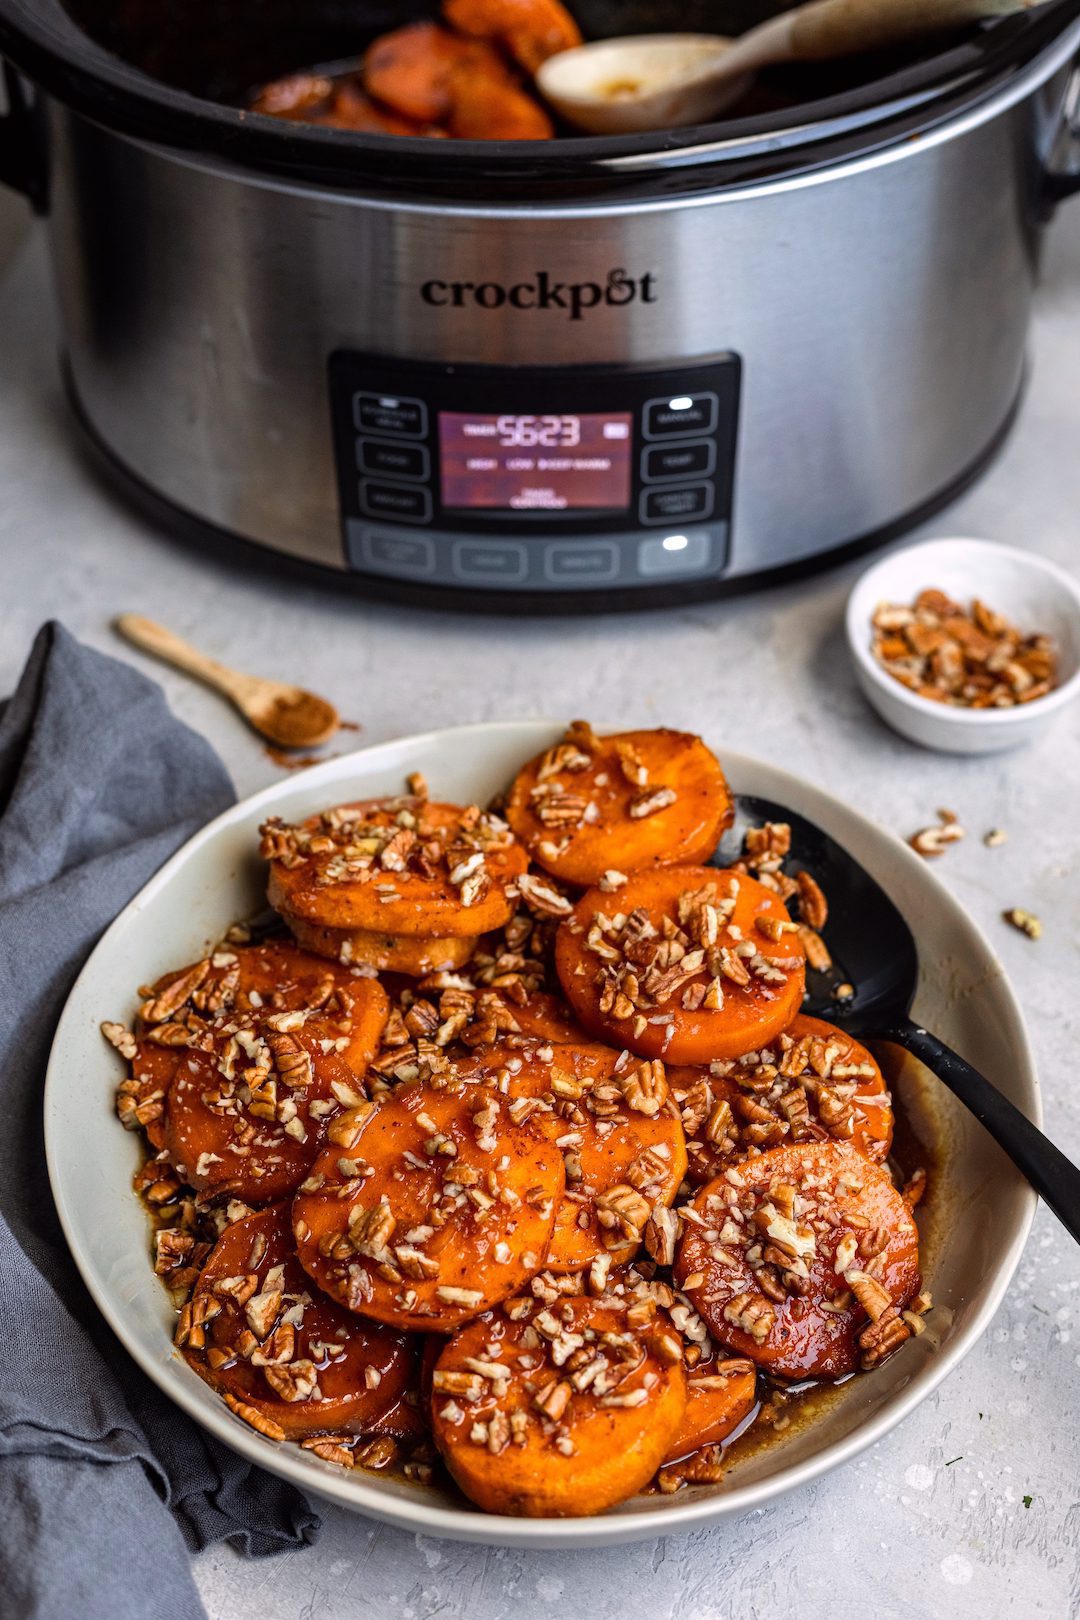 A plate of candied sweet potatoes topped with chopped pecans, showing a CrockPot slow cooker in the background. 